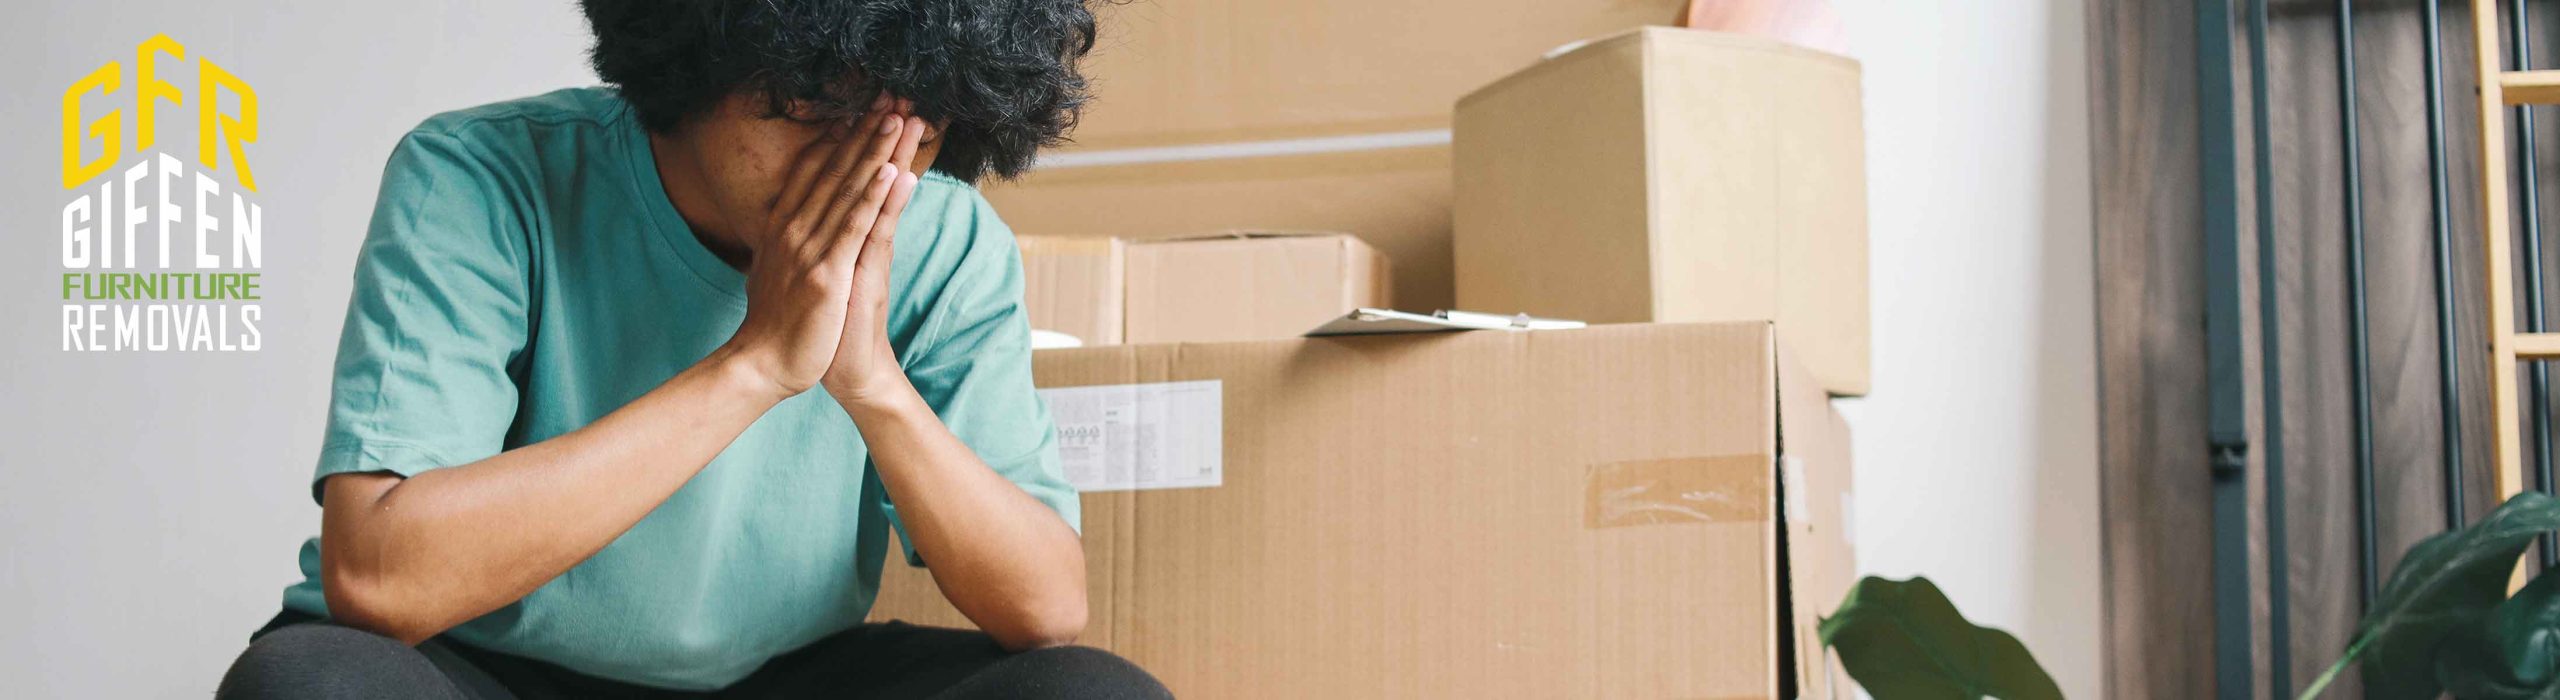 Giffen Furniture Removals Easing The Stress Of Moving: Mental Health Tips During Furniture Removals